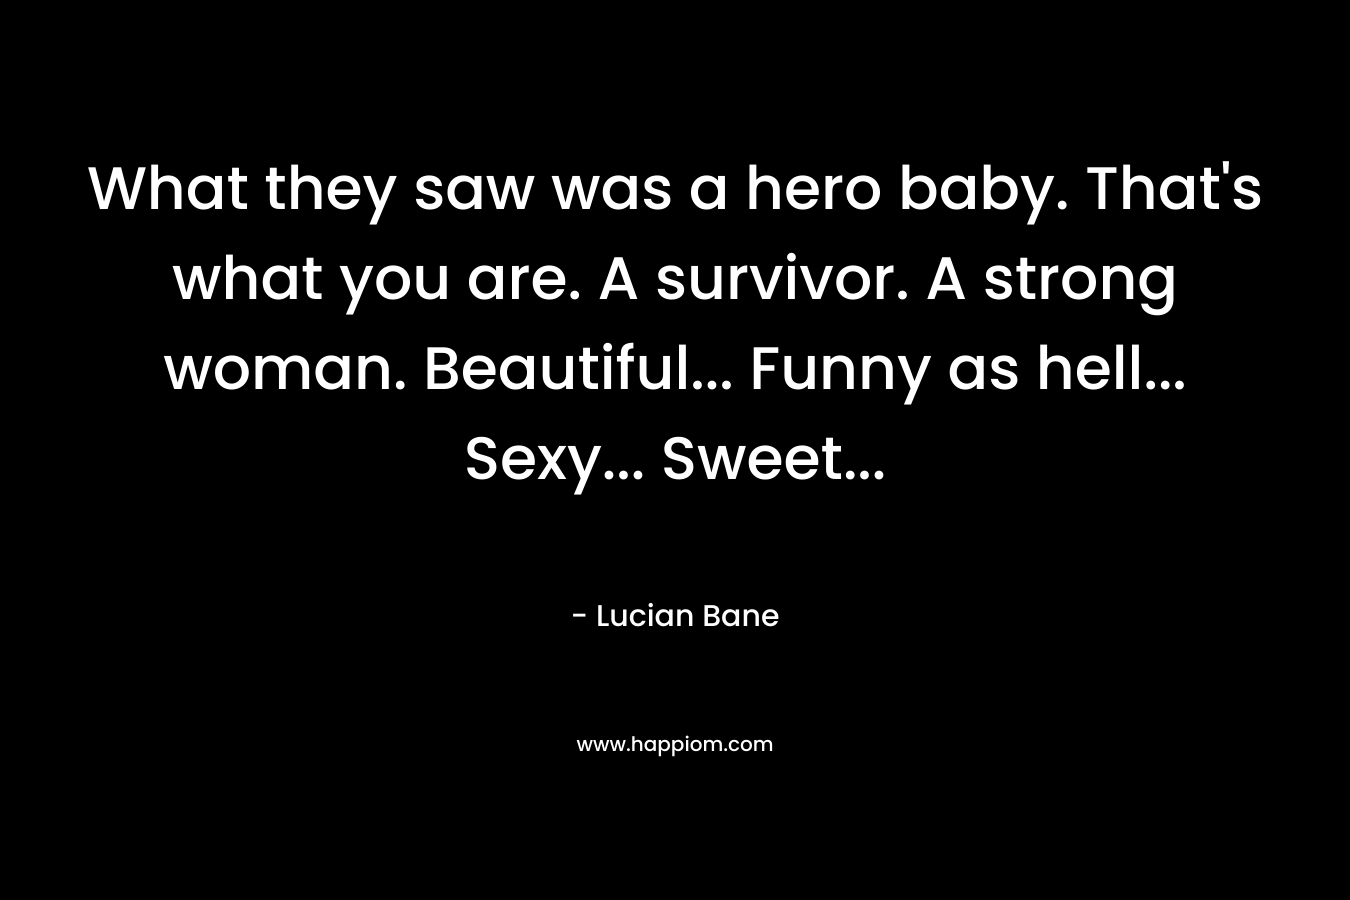 What they saw was a hero baby. That’s what you are. A survivor. A strong woman. Beautiful… Funny as hell… Sexy… Sweet… – Lucian Bane